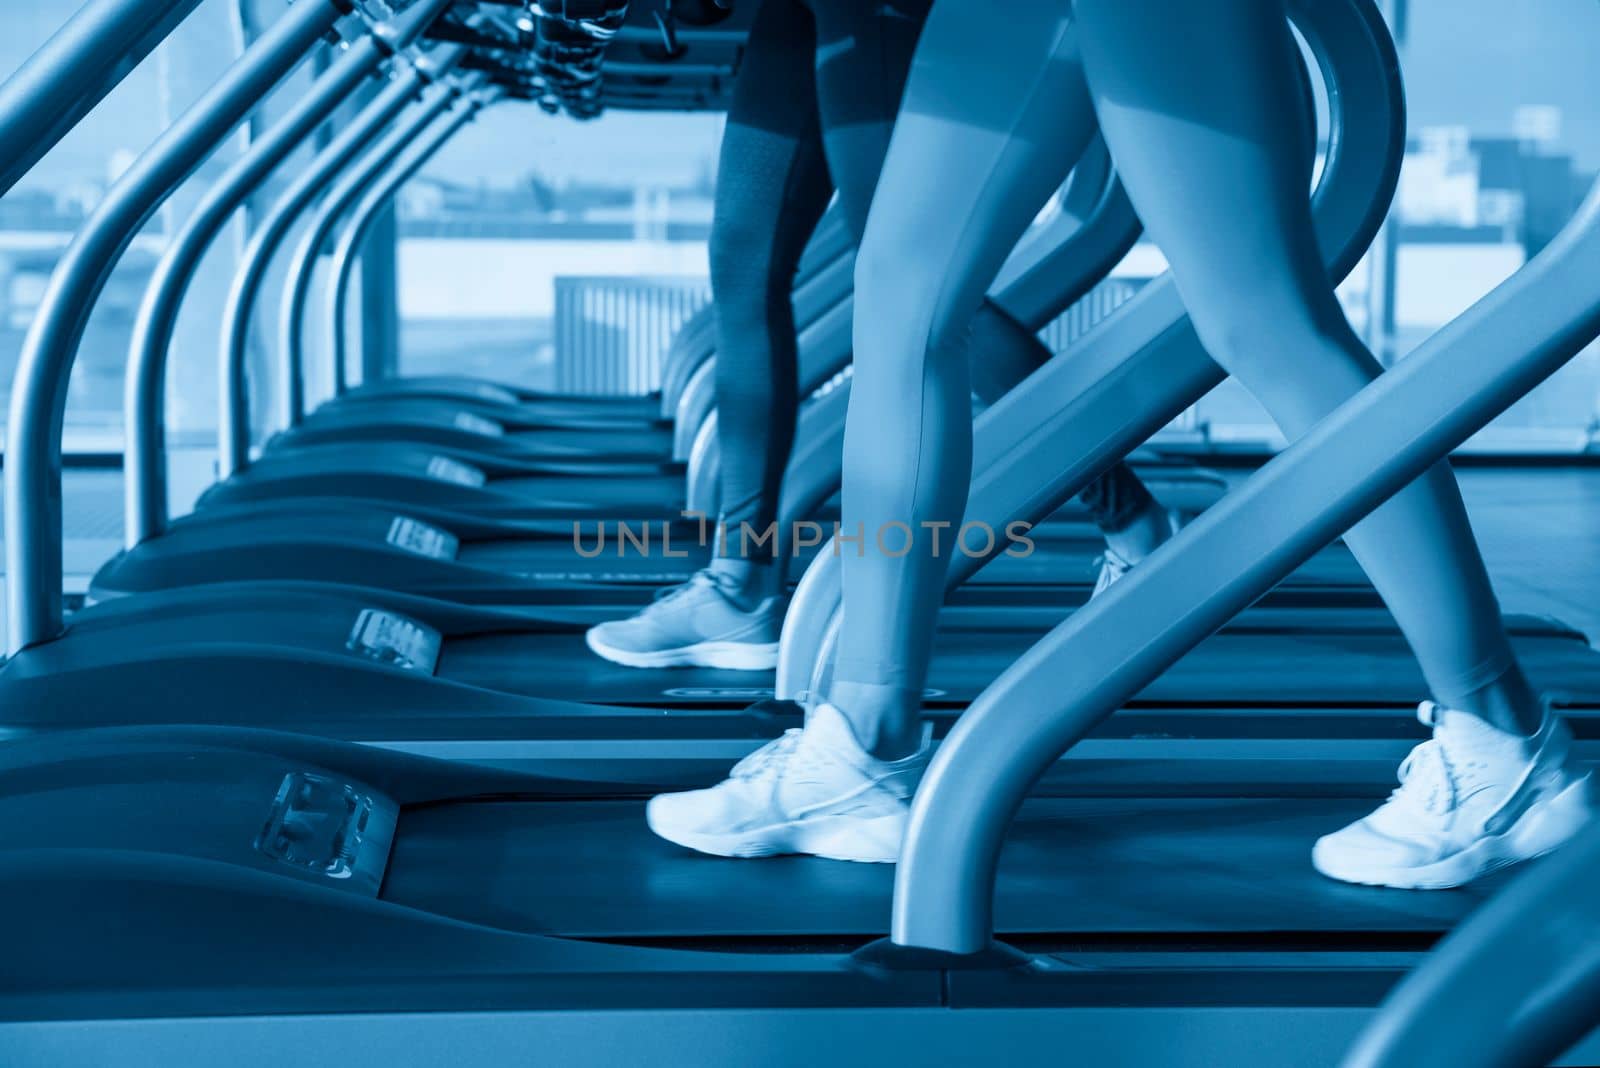 Two young women running on treadmill in gym by Mariakray